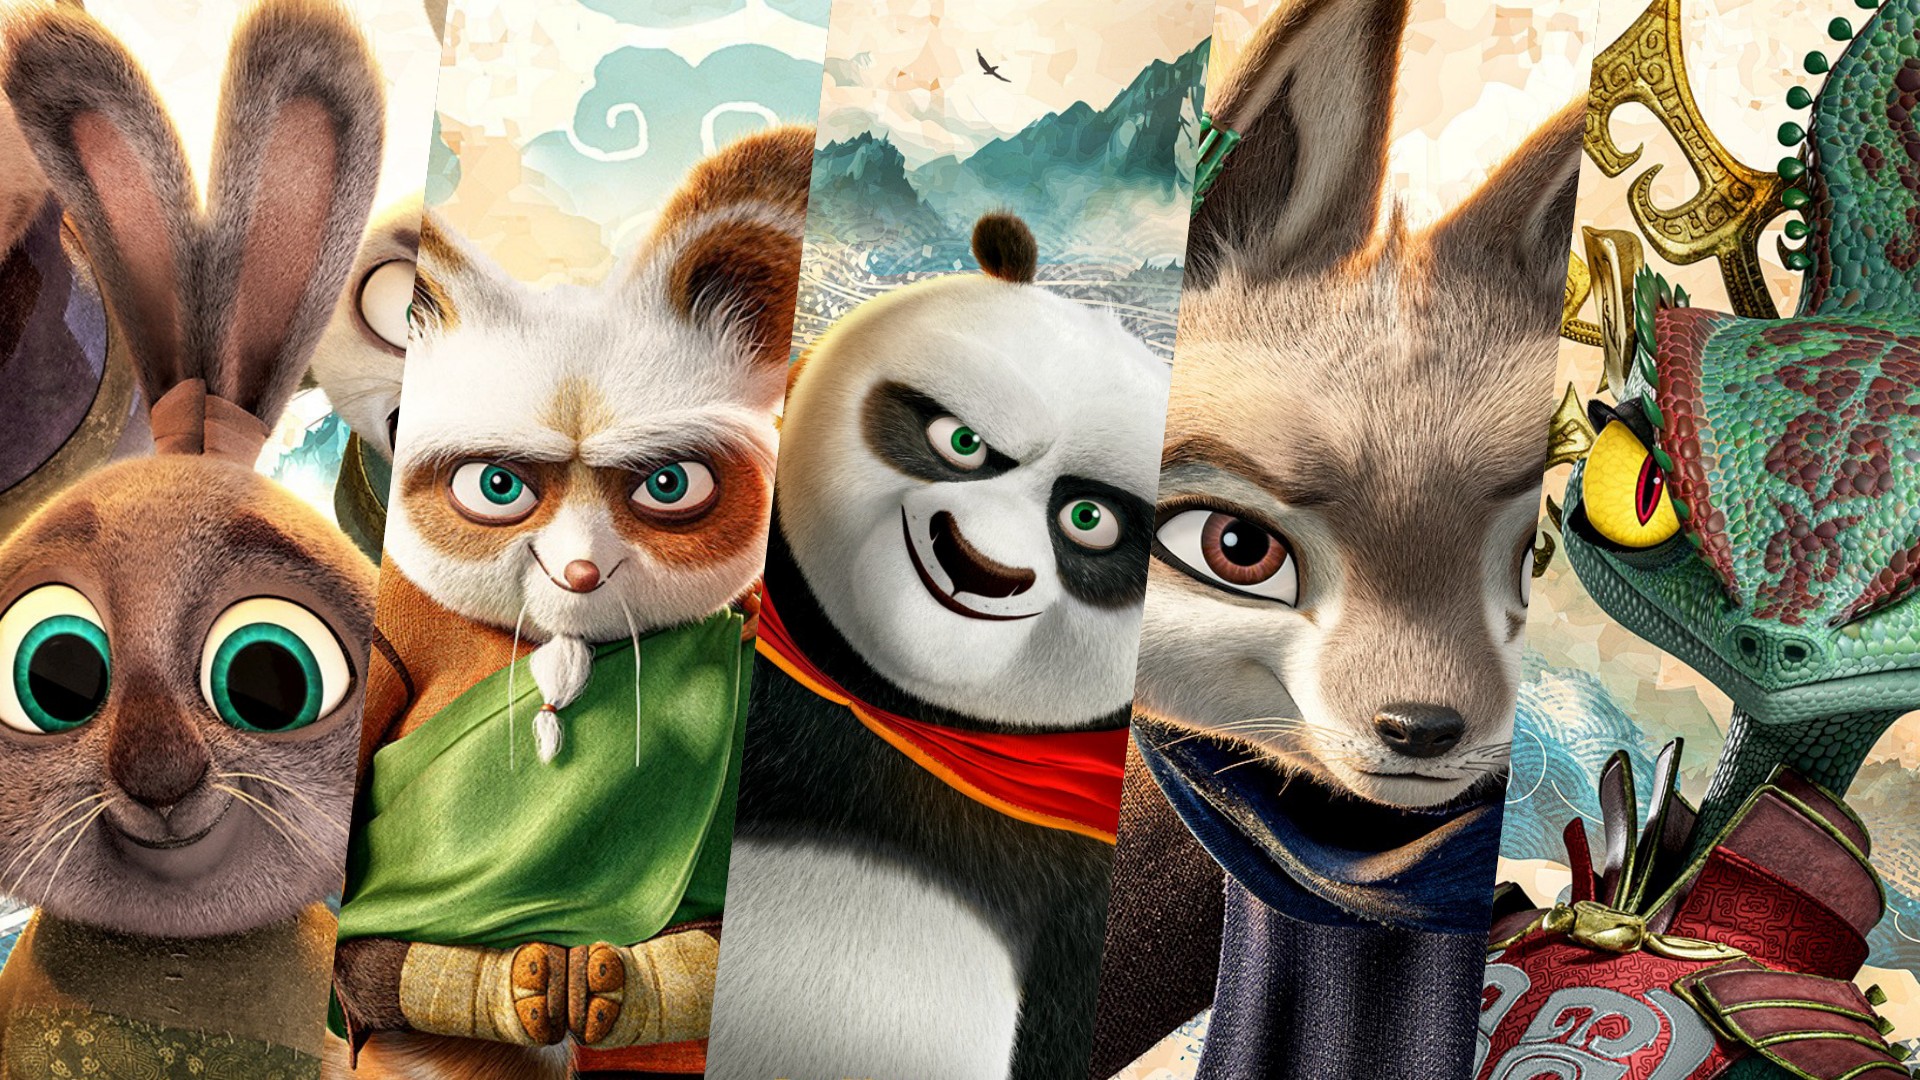 Kung Fu Panda 4 character posters released - GadgetMatch